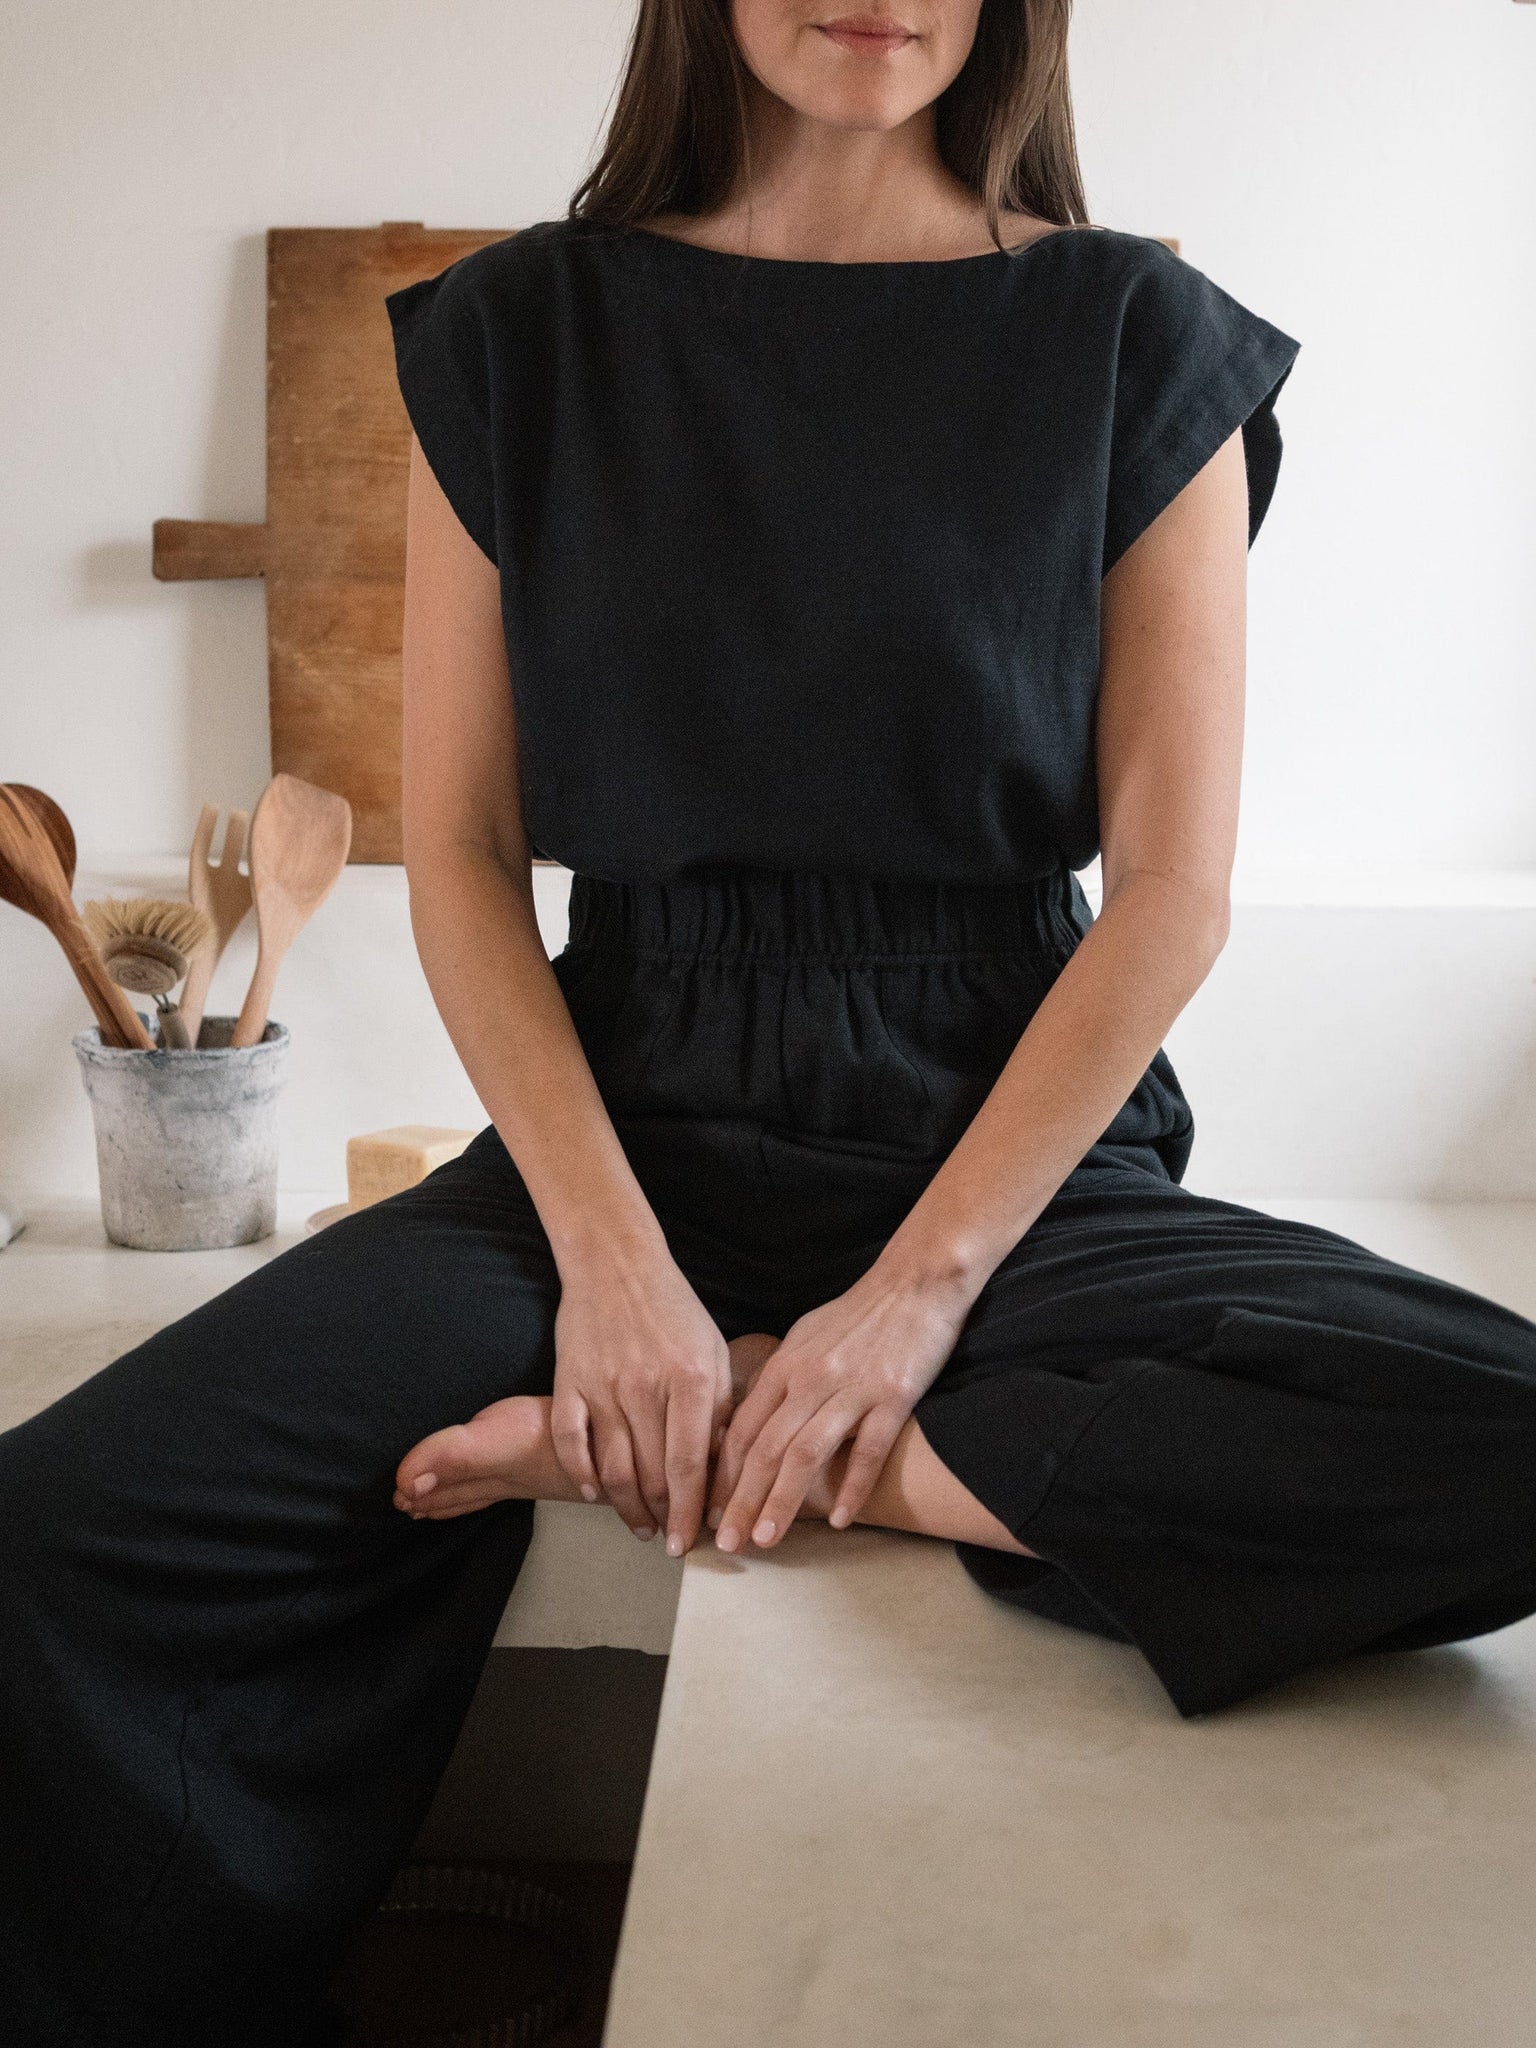 A woman sitting on a counter in an Everyday Top - Black Cotton made of organic cotton.